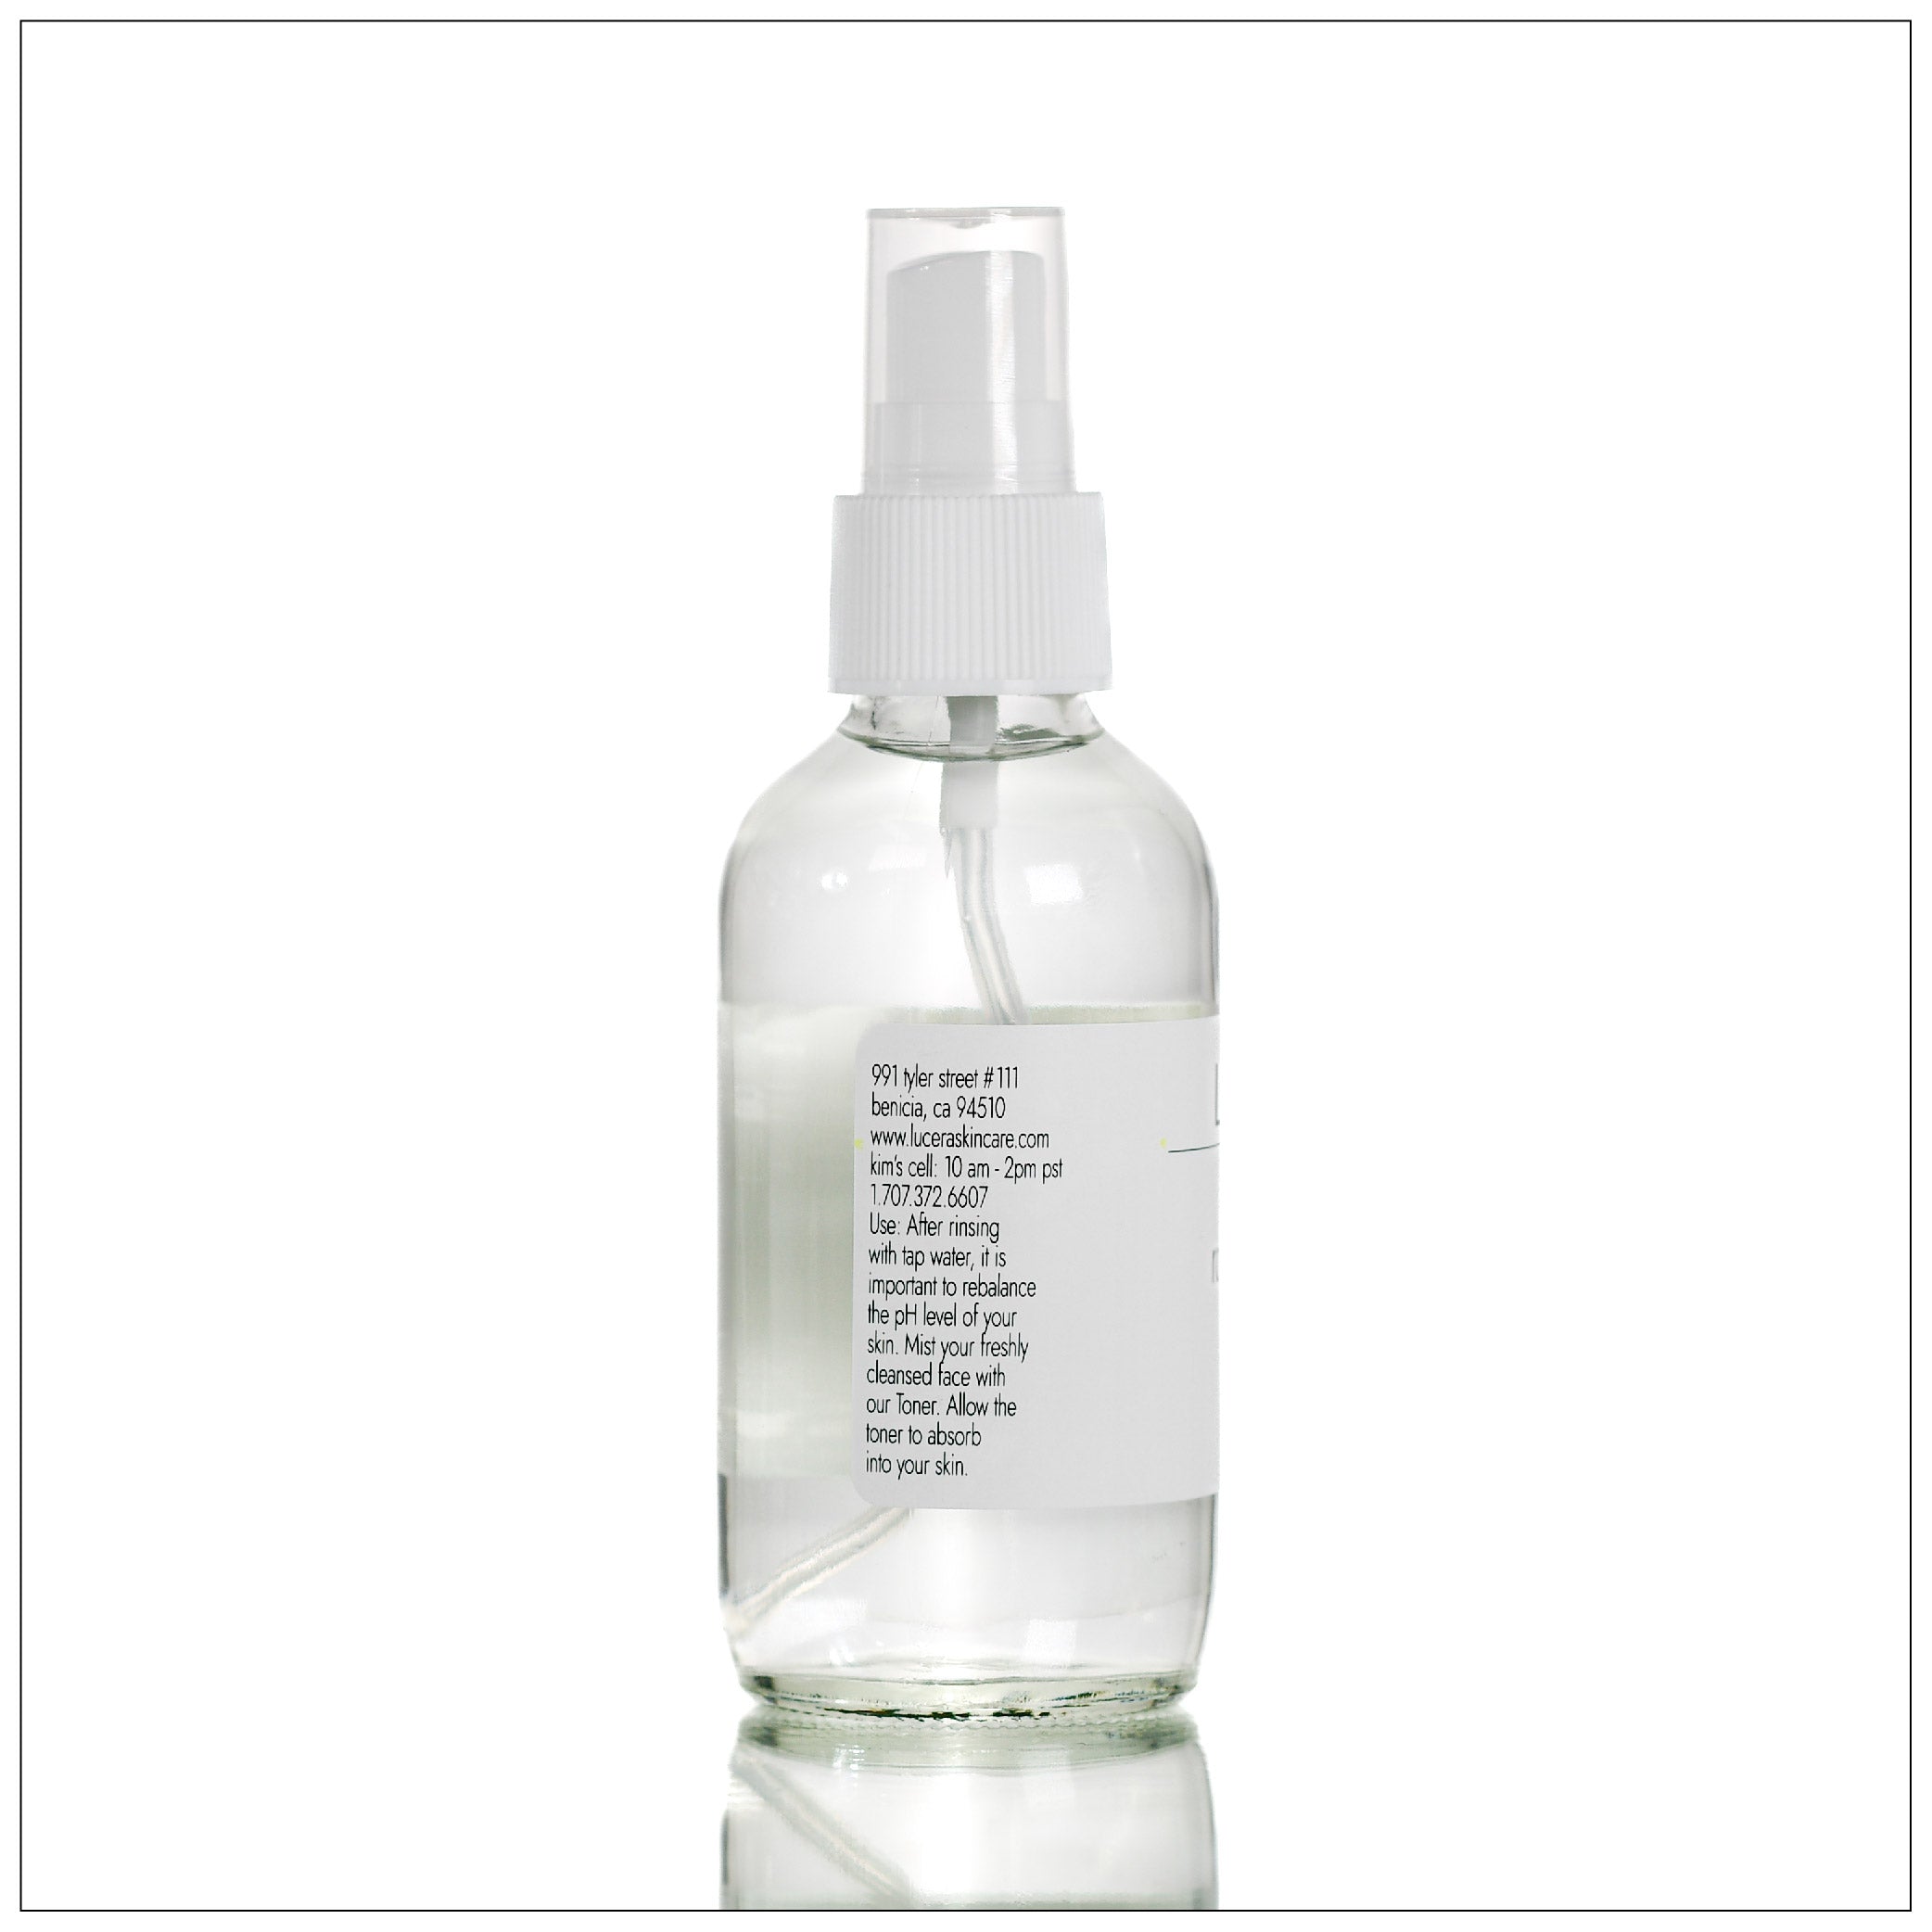 Pearlessence Rosewater Facial toner, enriched with rosewater and